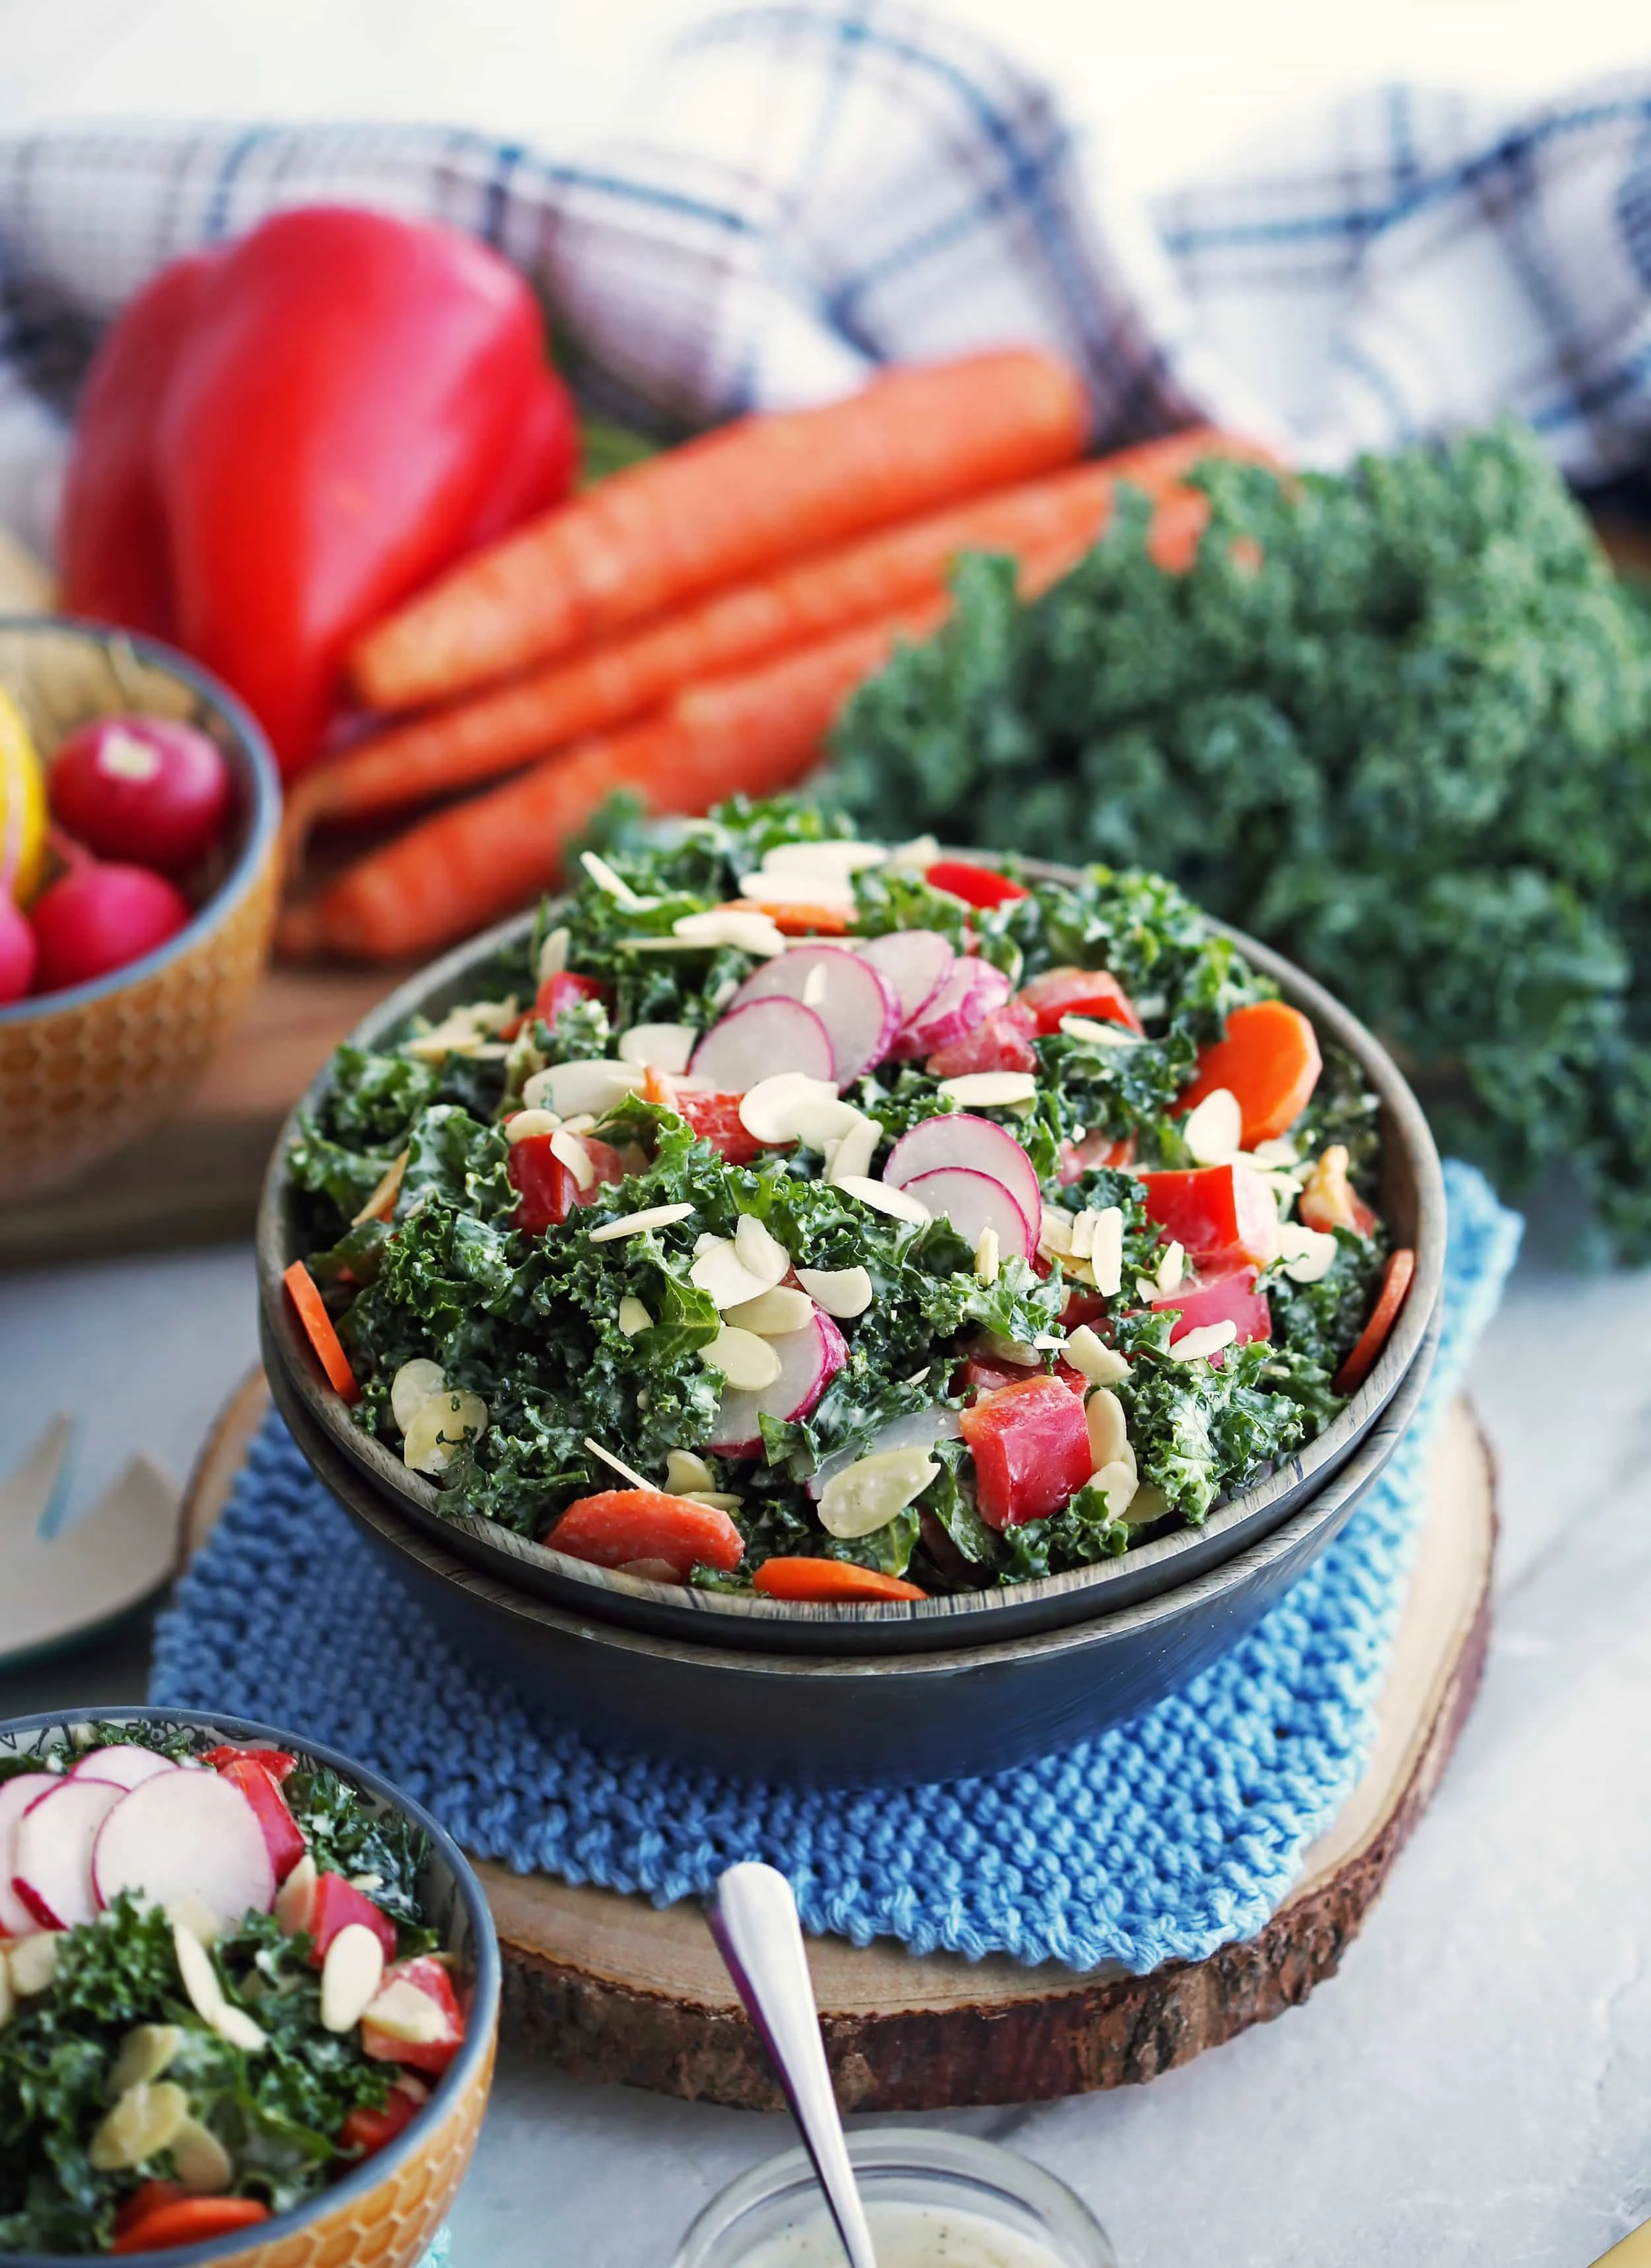 Crunchy salad made with kale, carrots, radishes, peppers, almonds, and parmesan yogurt dressing in a wooden bowl.